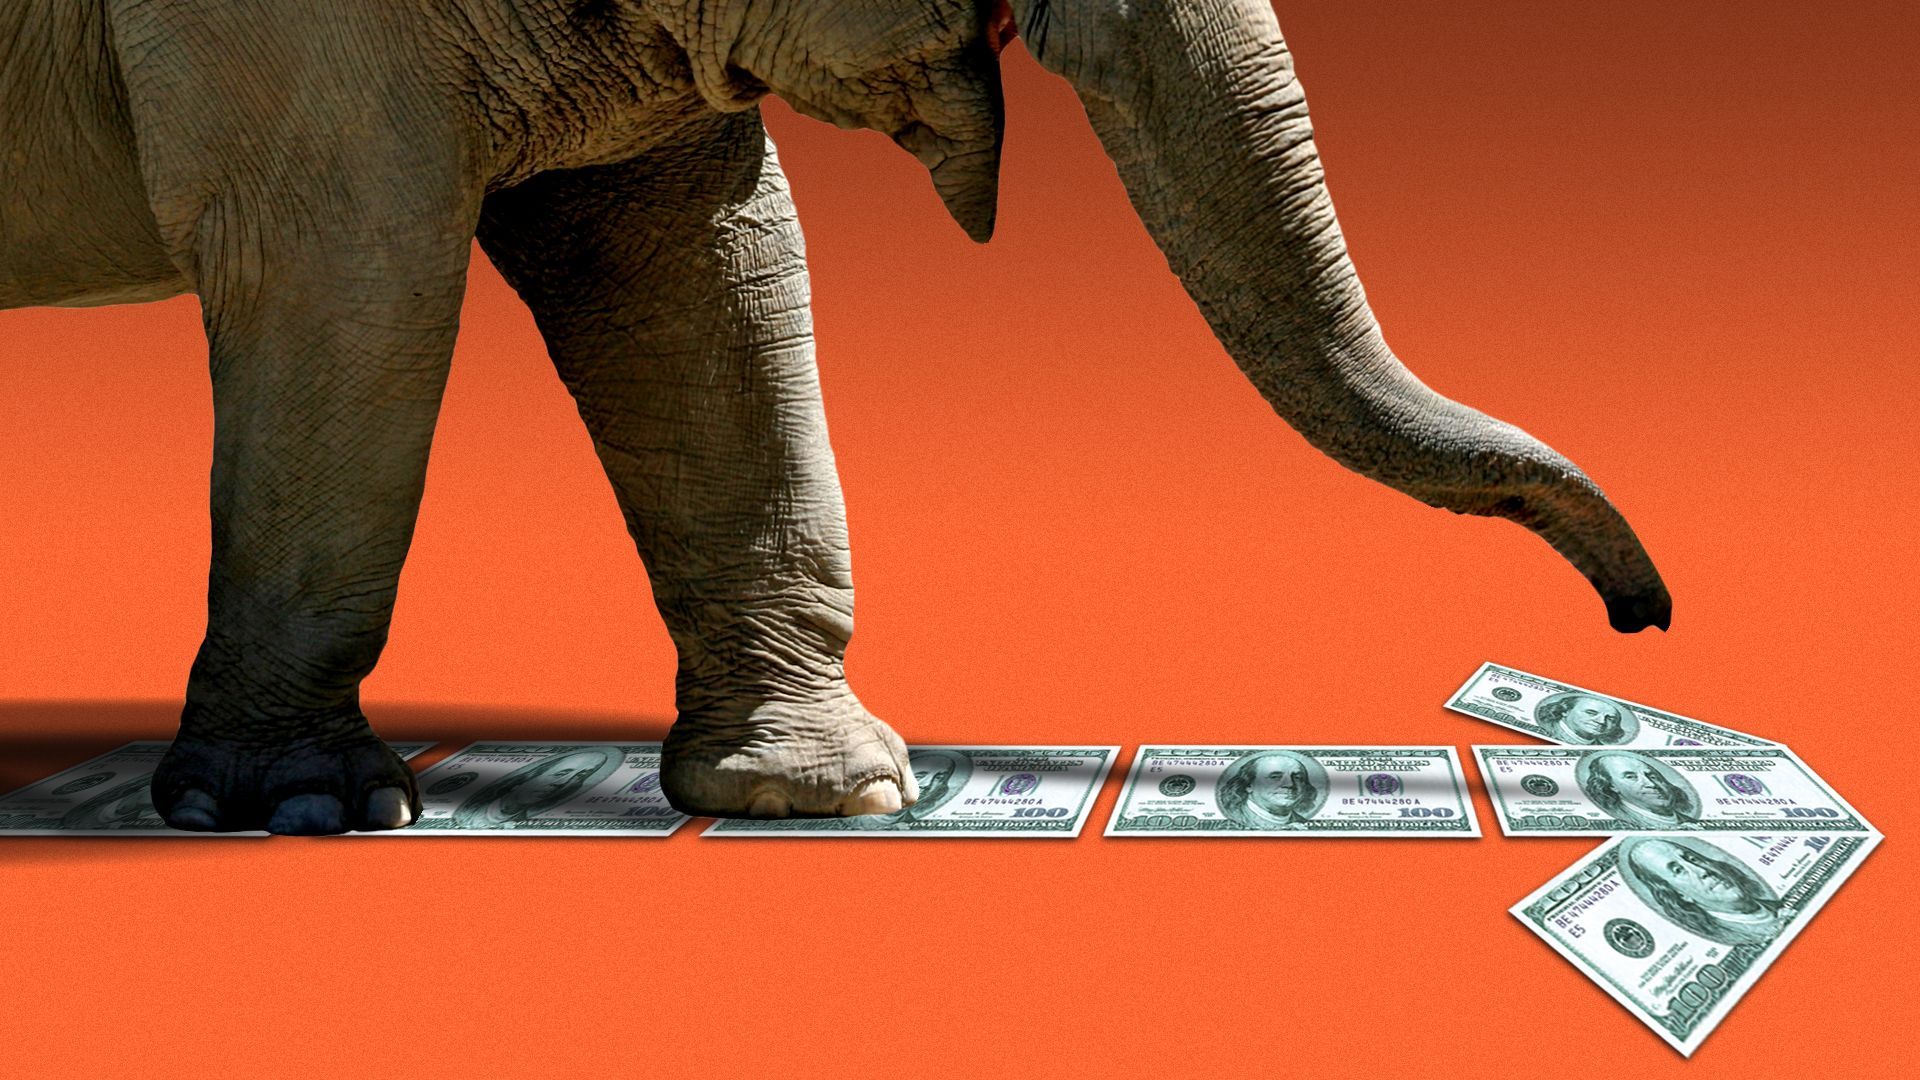 Illustration of an elephant following an arrow made from one hundred dollar bills